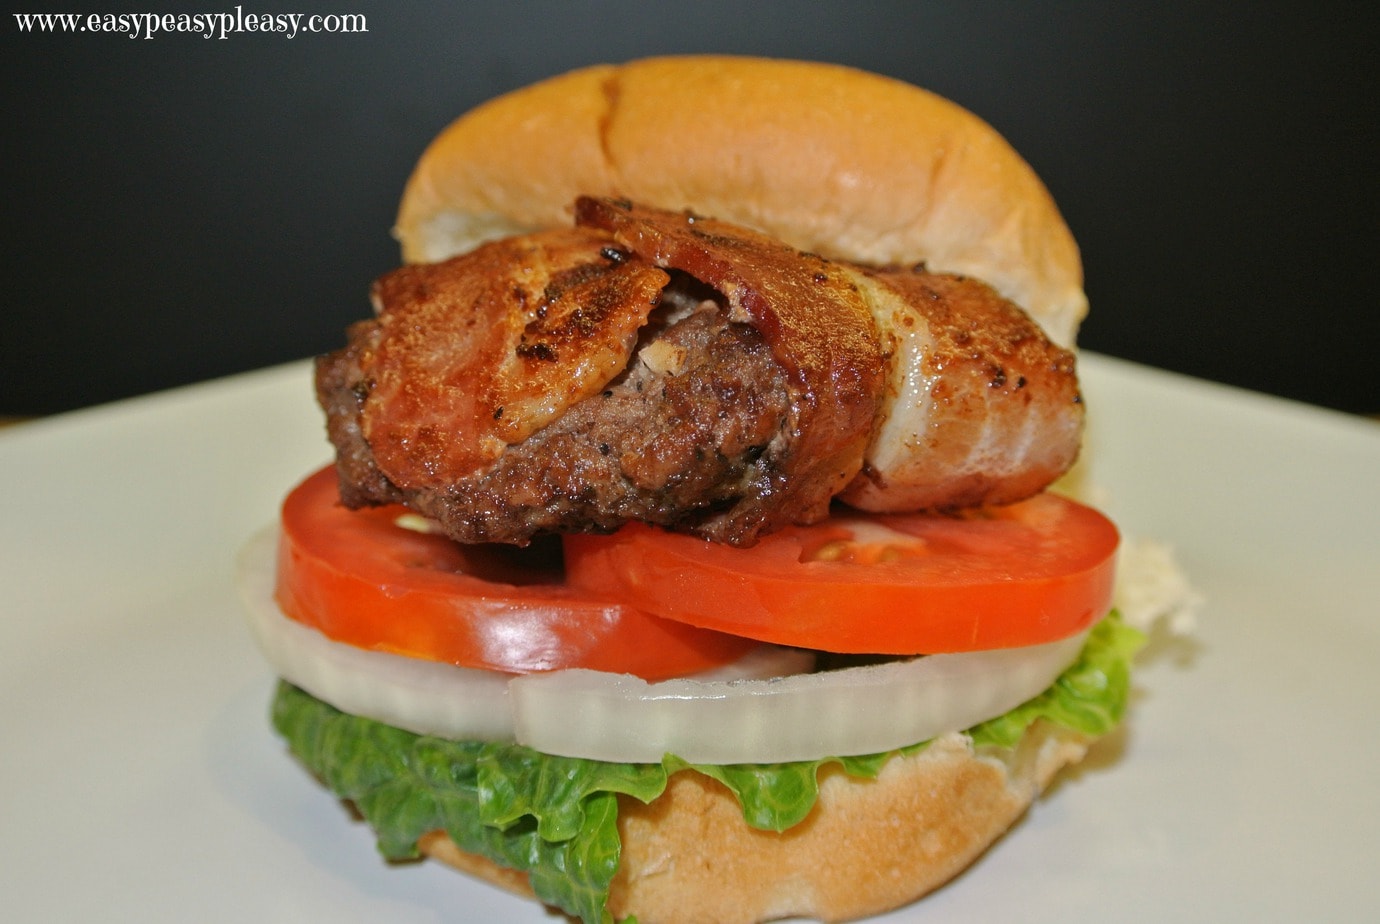 It's cookout season so spare the oven and fire up the grill with these bacon wrapped sliders. There's no need to cook the bacon ahead of time. The bacon cooks on the burger!